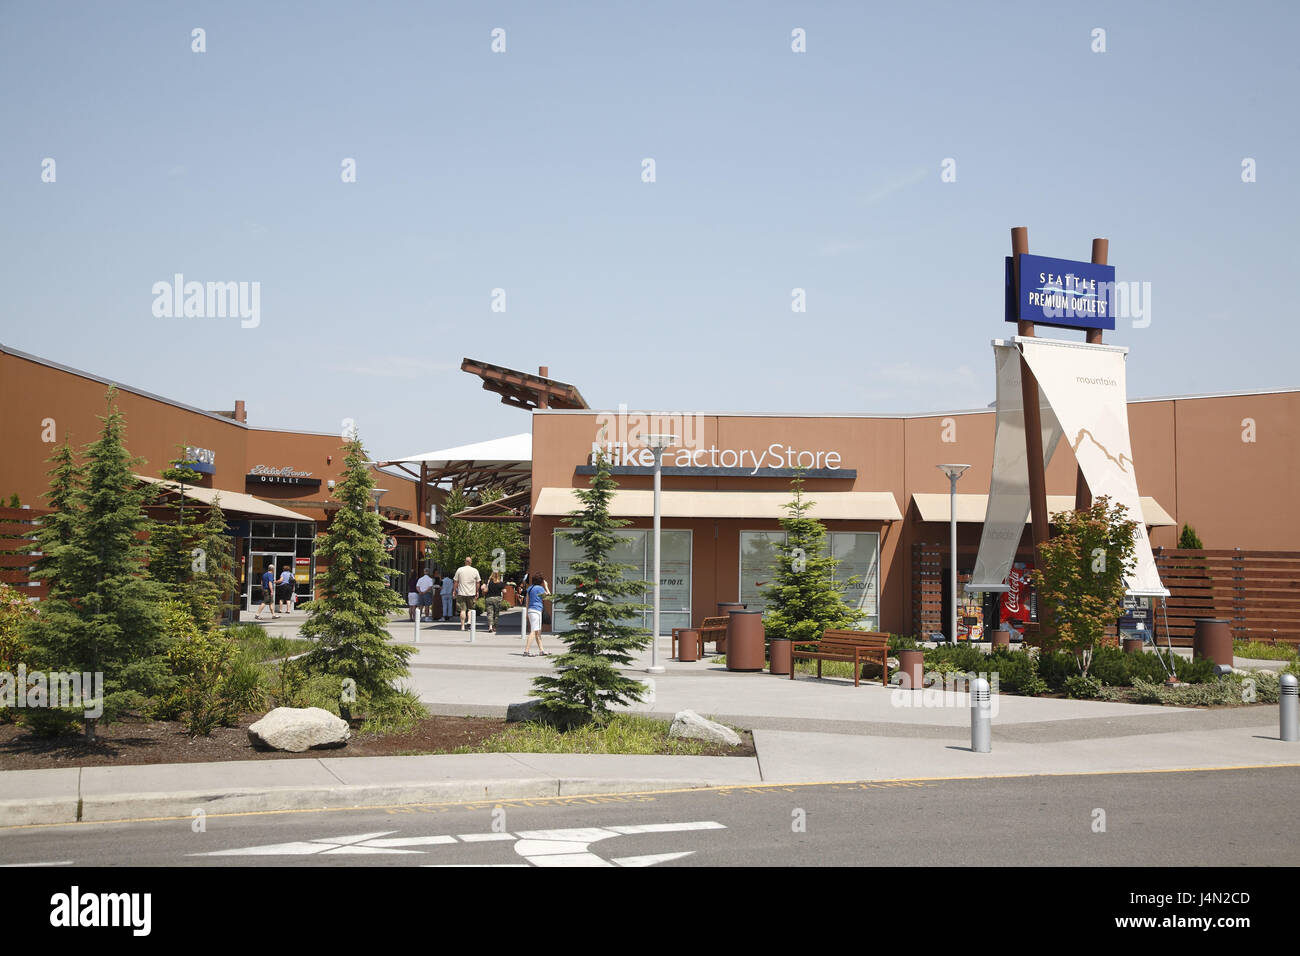 ugg seattle premium outlet Cheaper Than 